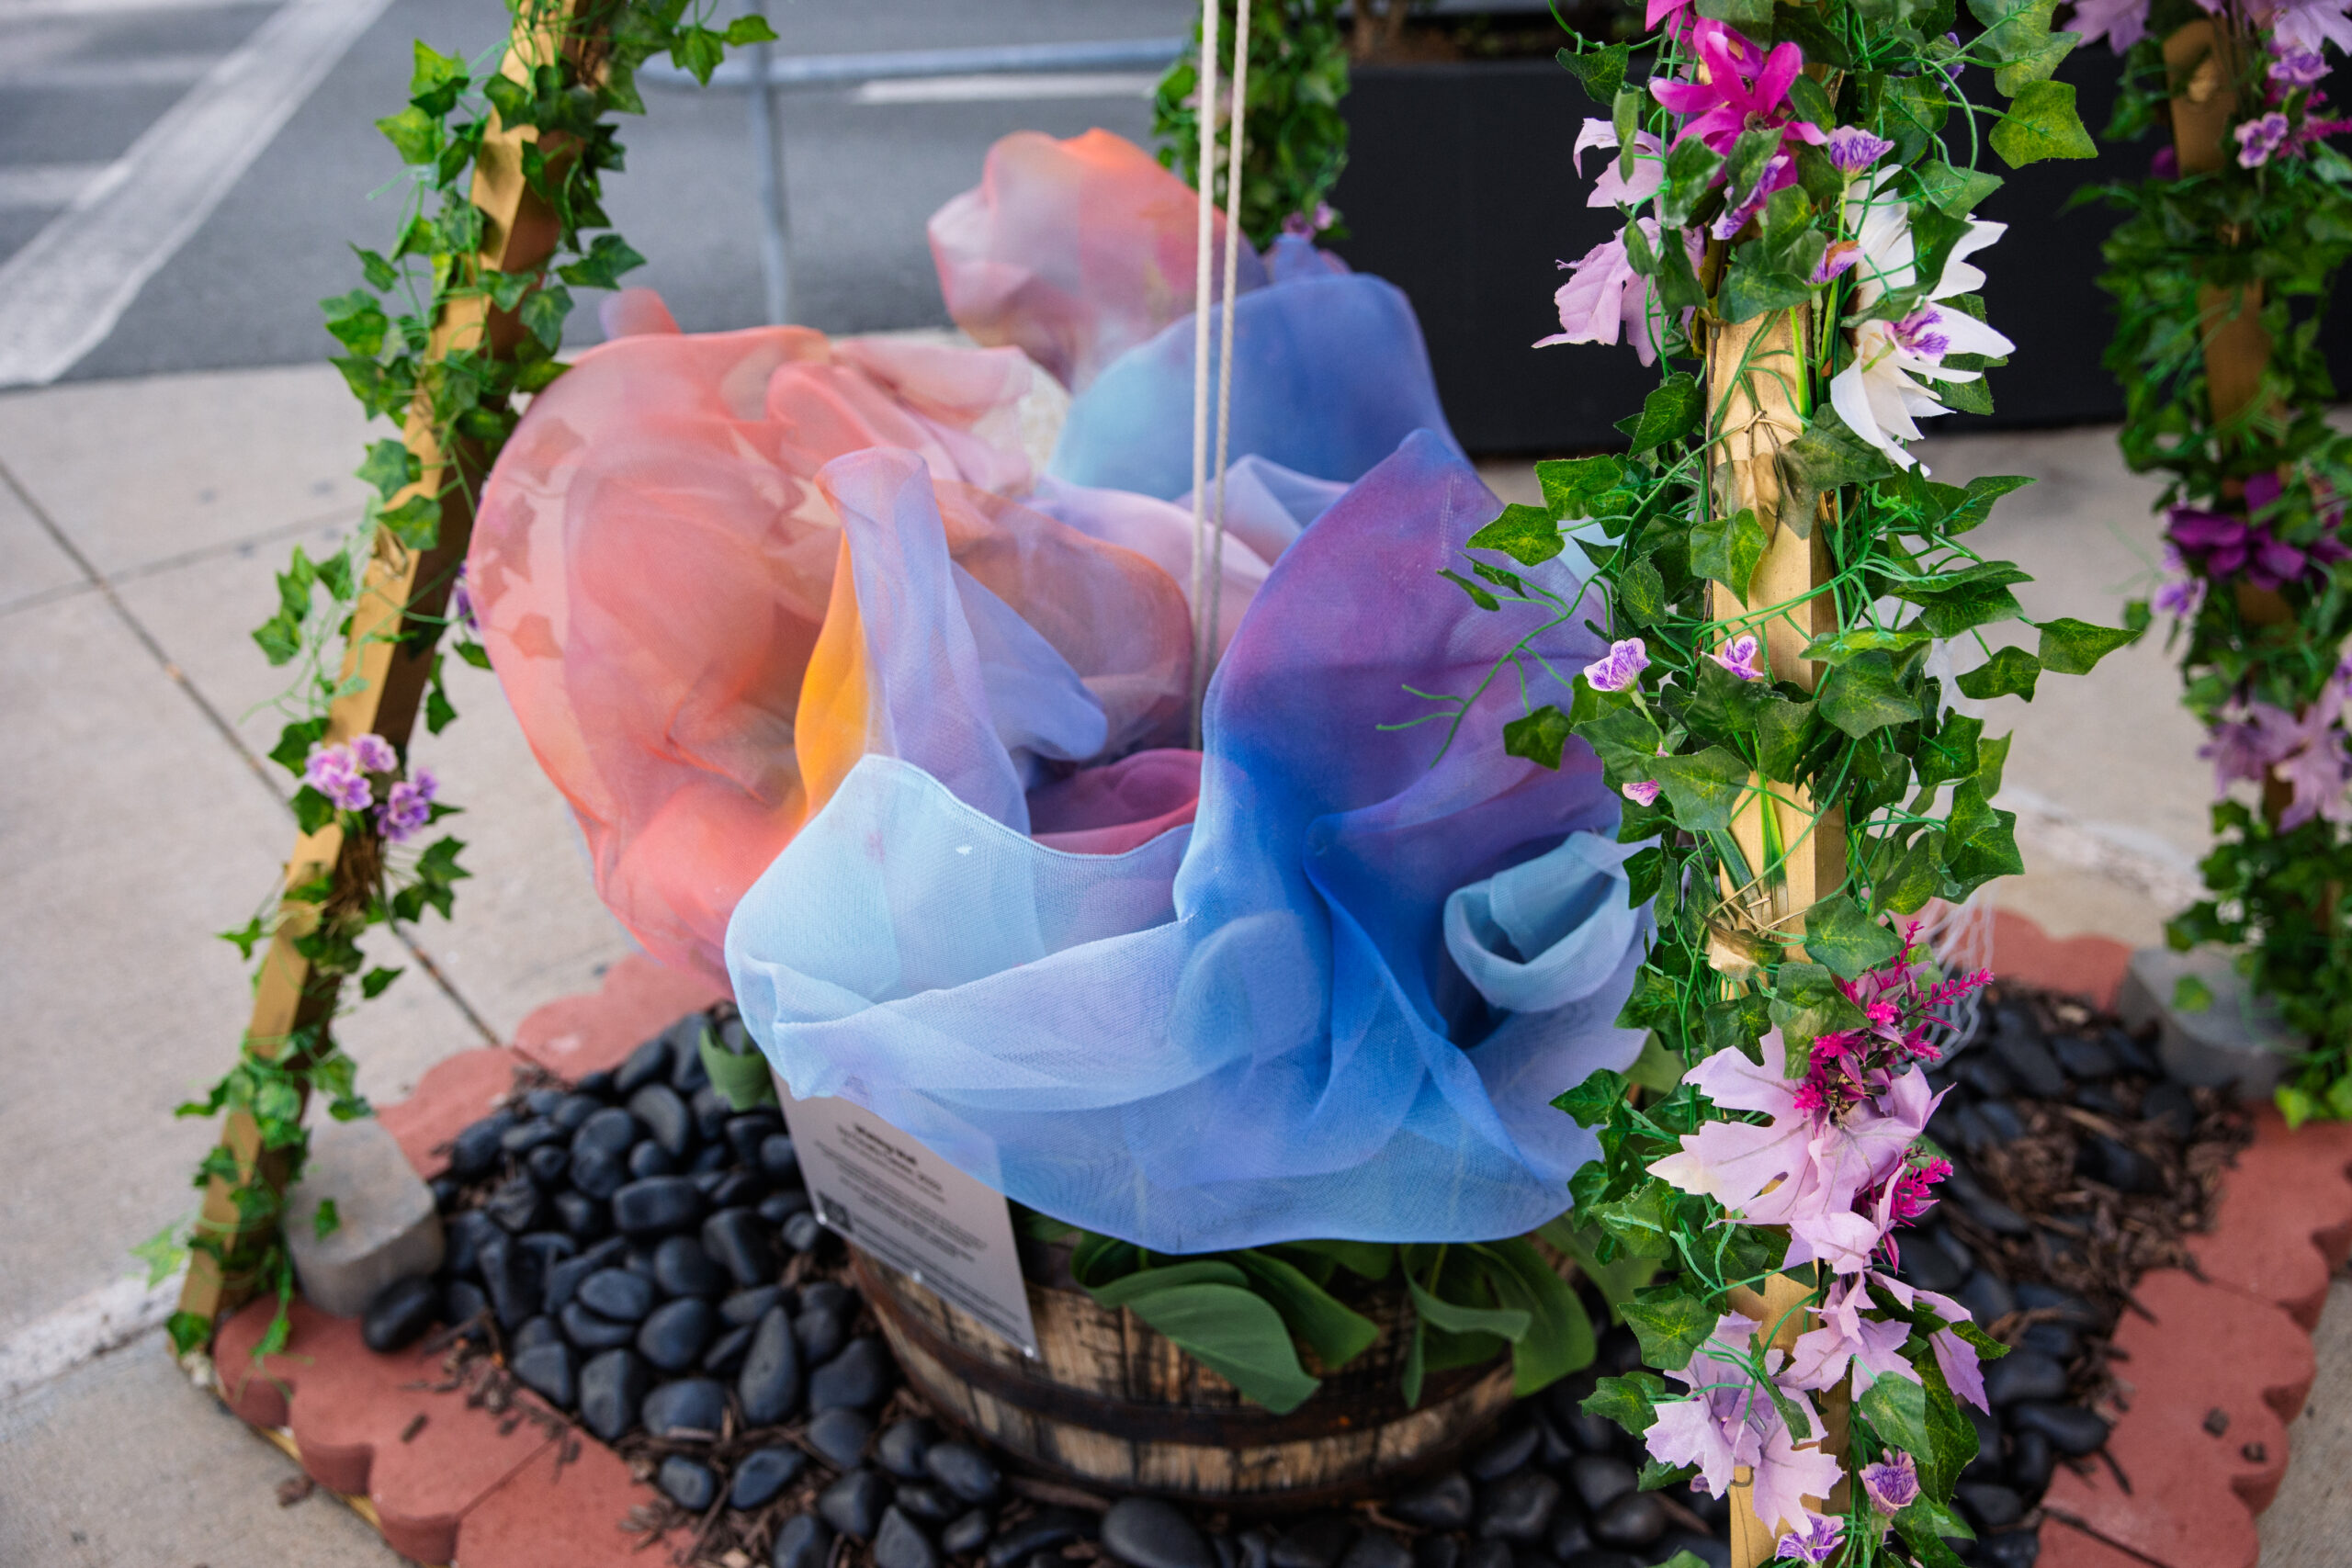 Wishing Well: Cicely Carew’s Installation Addresses Mental Health in the BIPOC Community for Be the Change Boston 2023